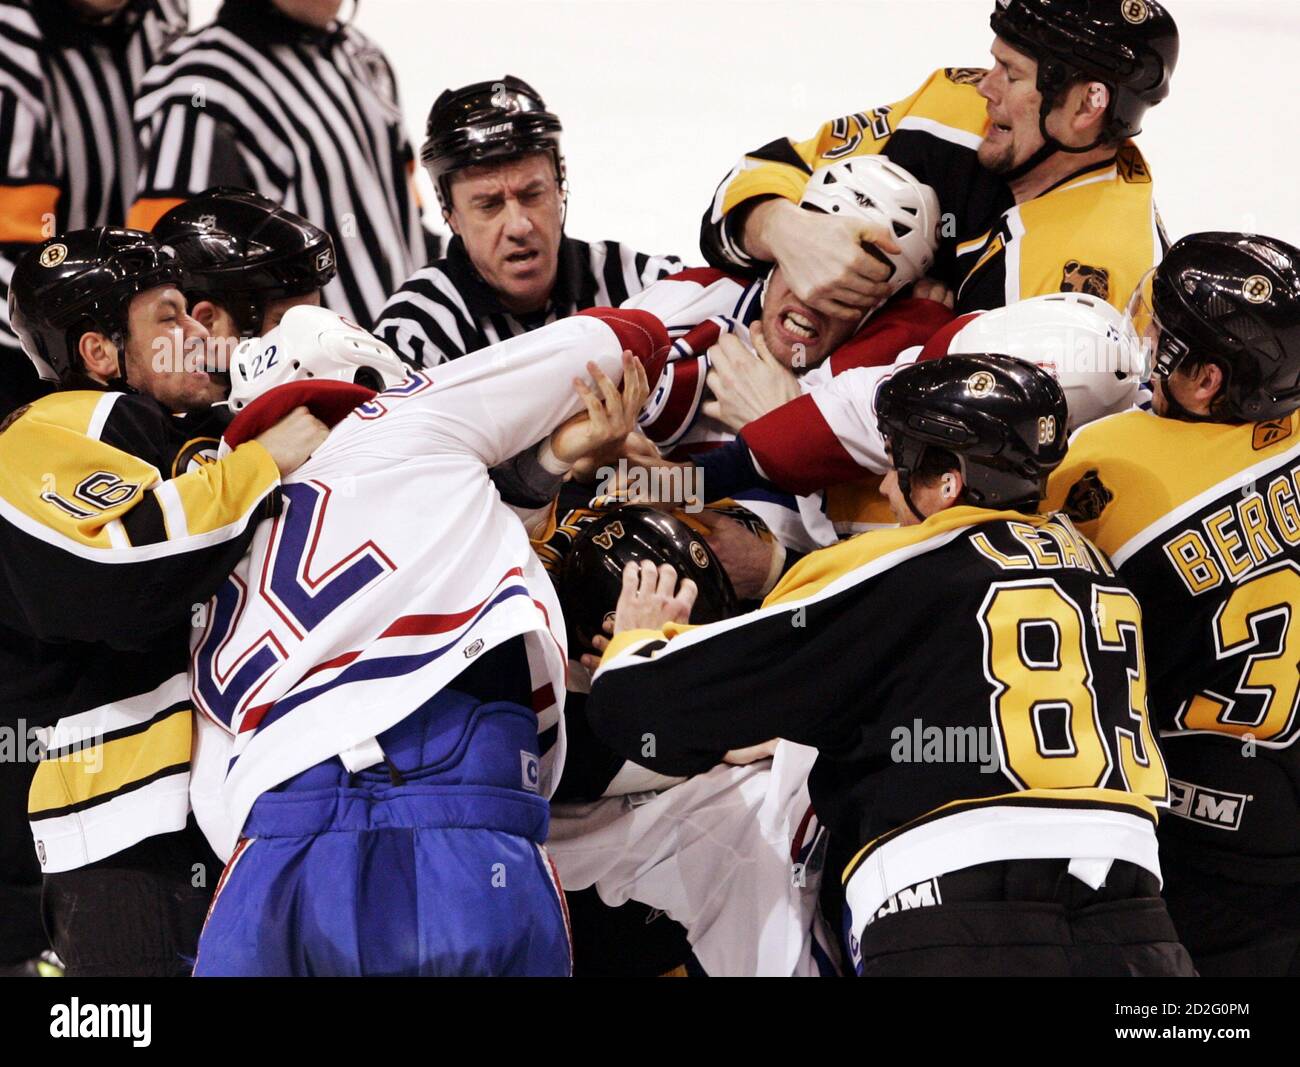 (L-R) Boston Bruins Marco Sturm (16), Montreal Canadiens Steve Begin (22), Nick Boynton (44 obscured), Canadiens Craig Rivet (face covered), Bruins Patrick Leahy (83), Bruins Hal Gill (25 grabbing Rivet's face) and Bruins Patrice Bergeron fight in the second period of their NHL game in Boston, Massachusetts March 9, 2006.      REUTERS/Brian Snyder Stock Photo